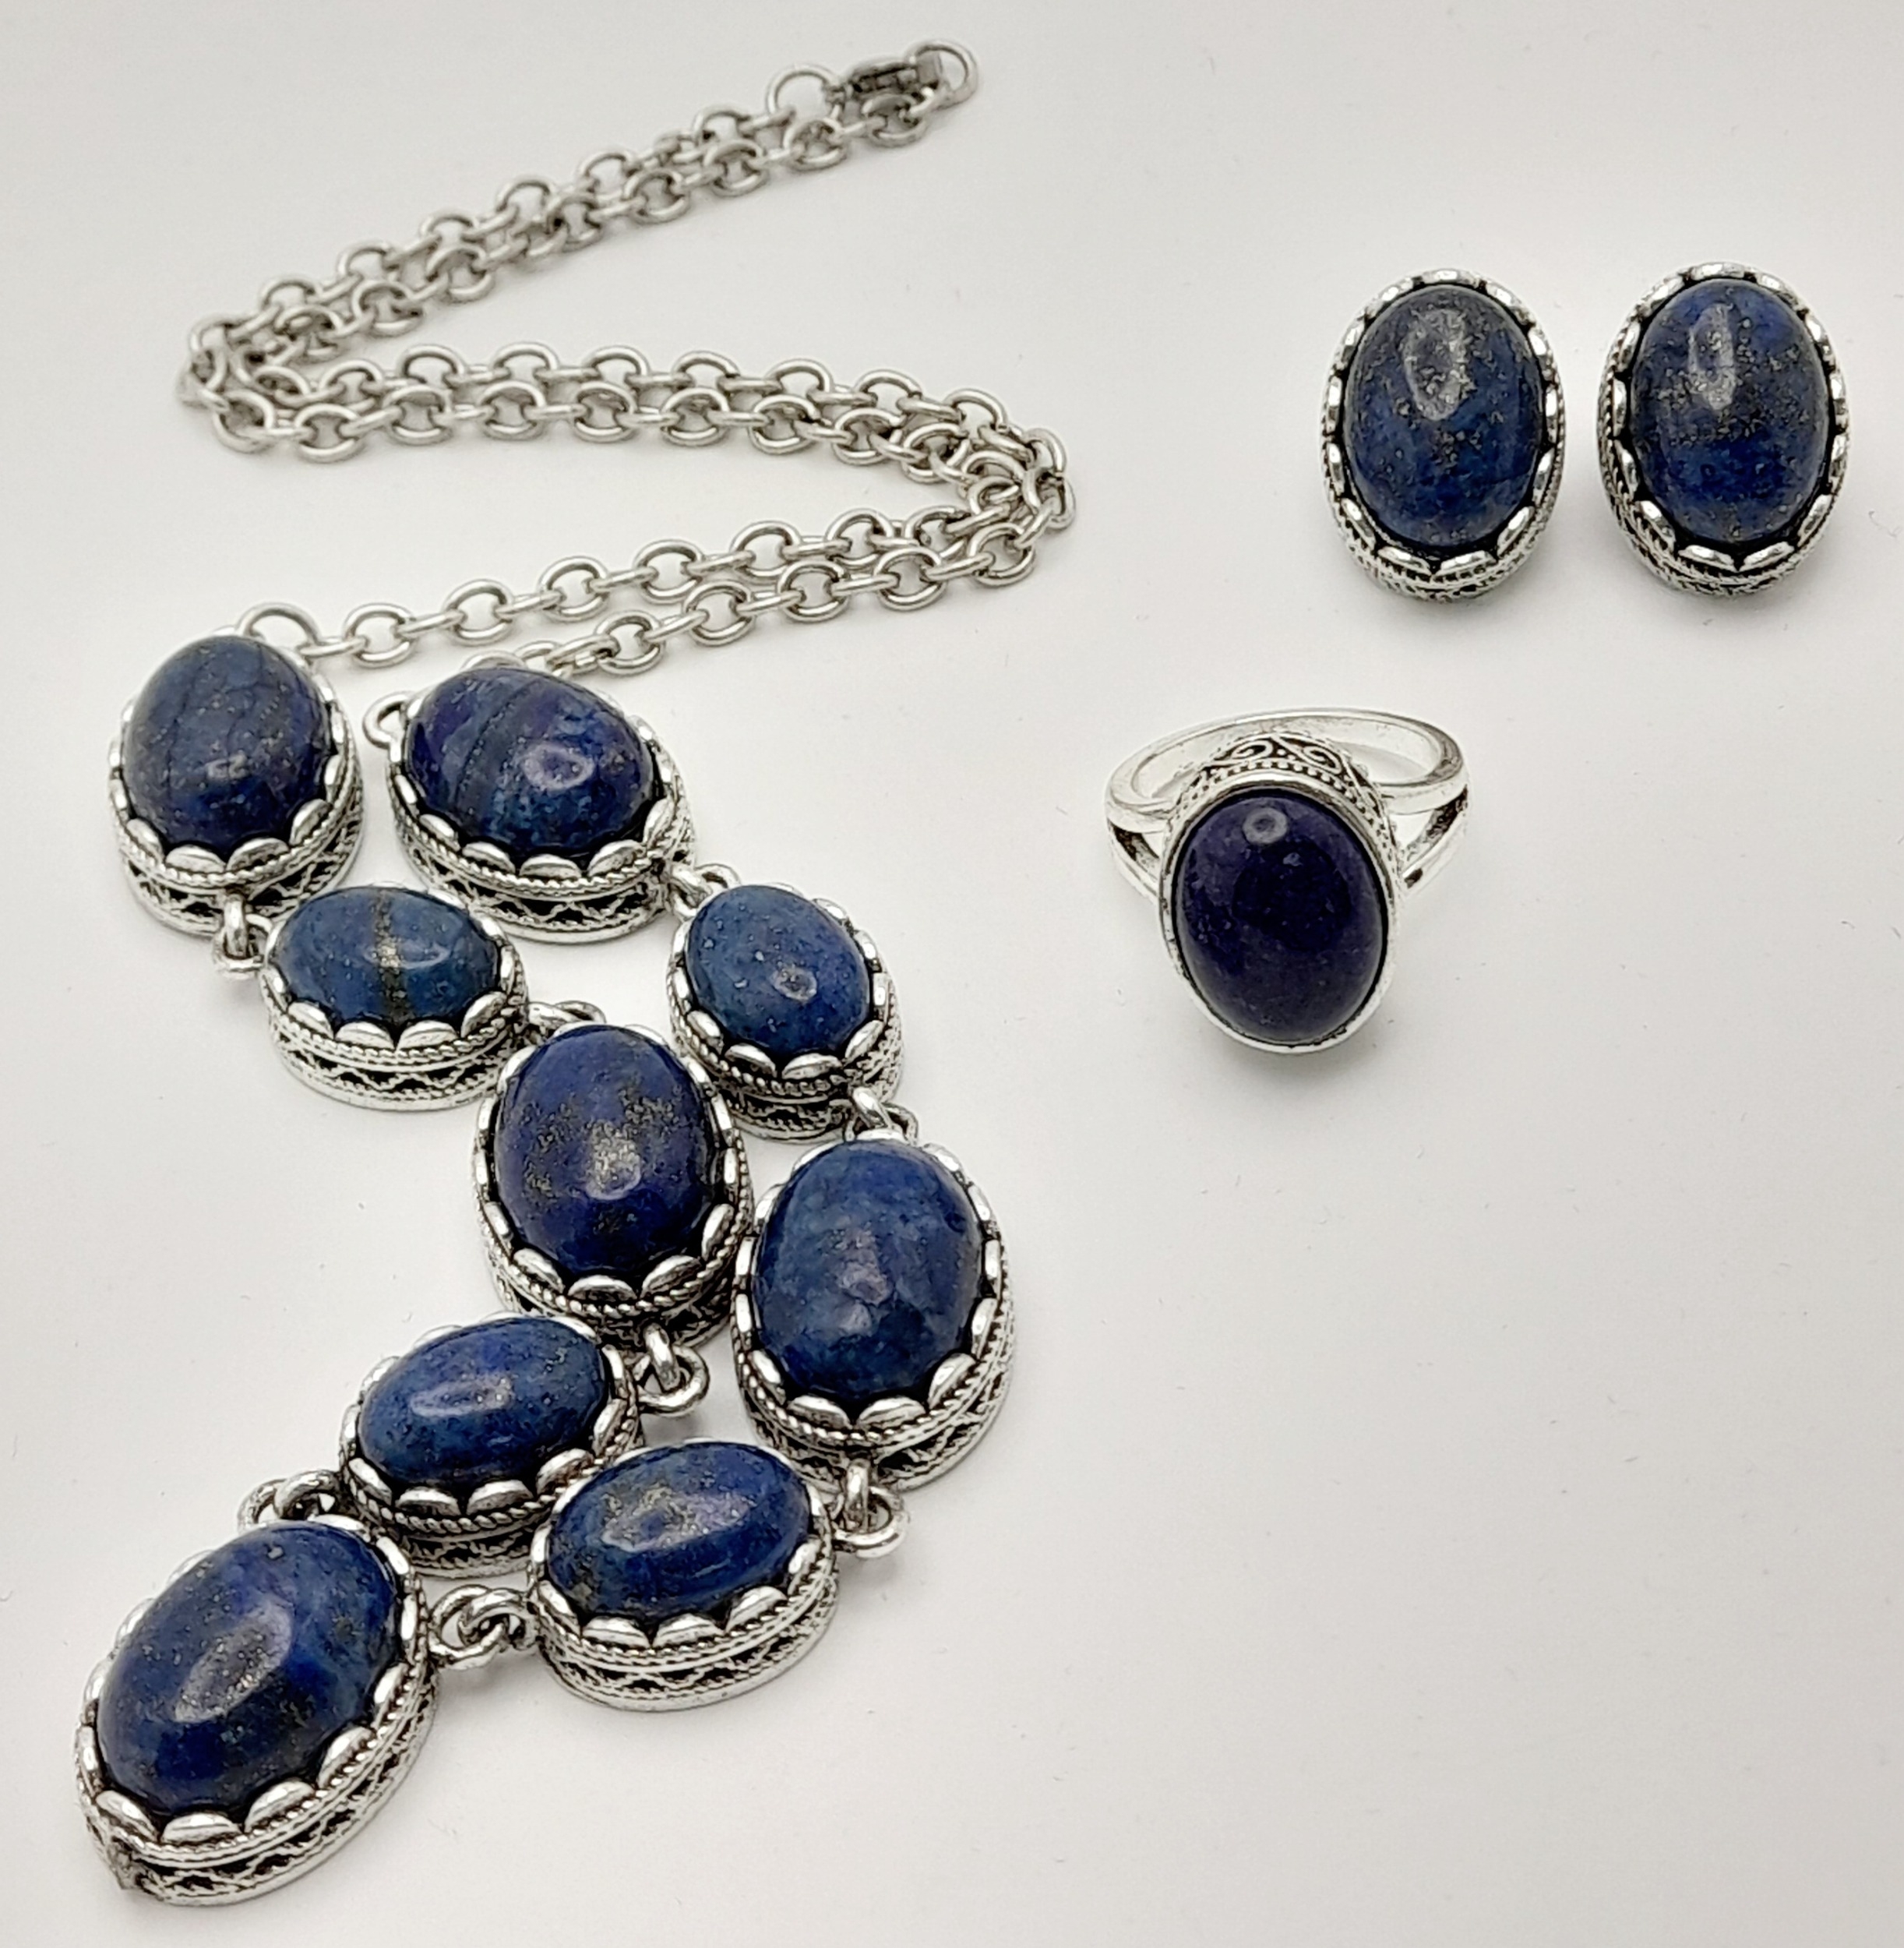 A Lapis Lazuli Jewellery Suite. Cabochon necklace, earrings and ring - size R.